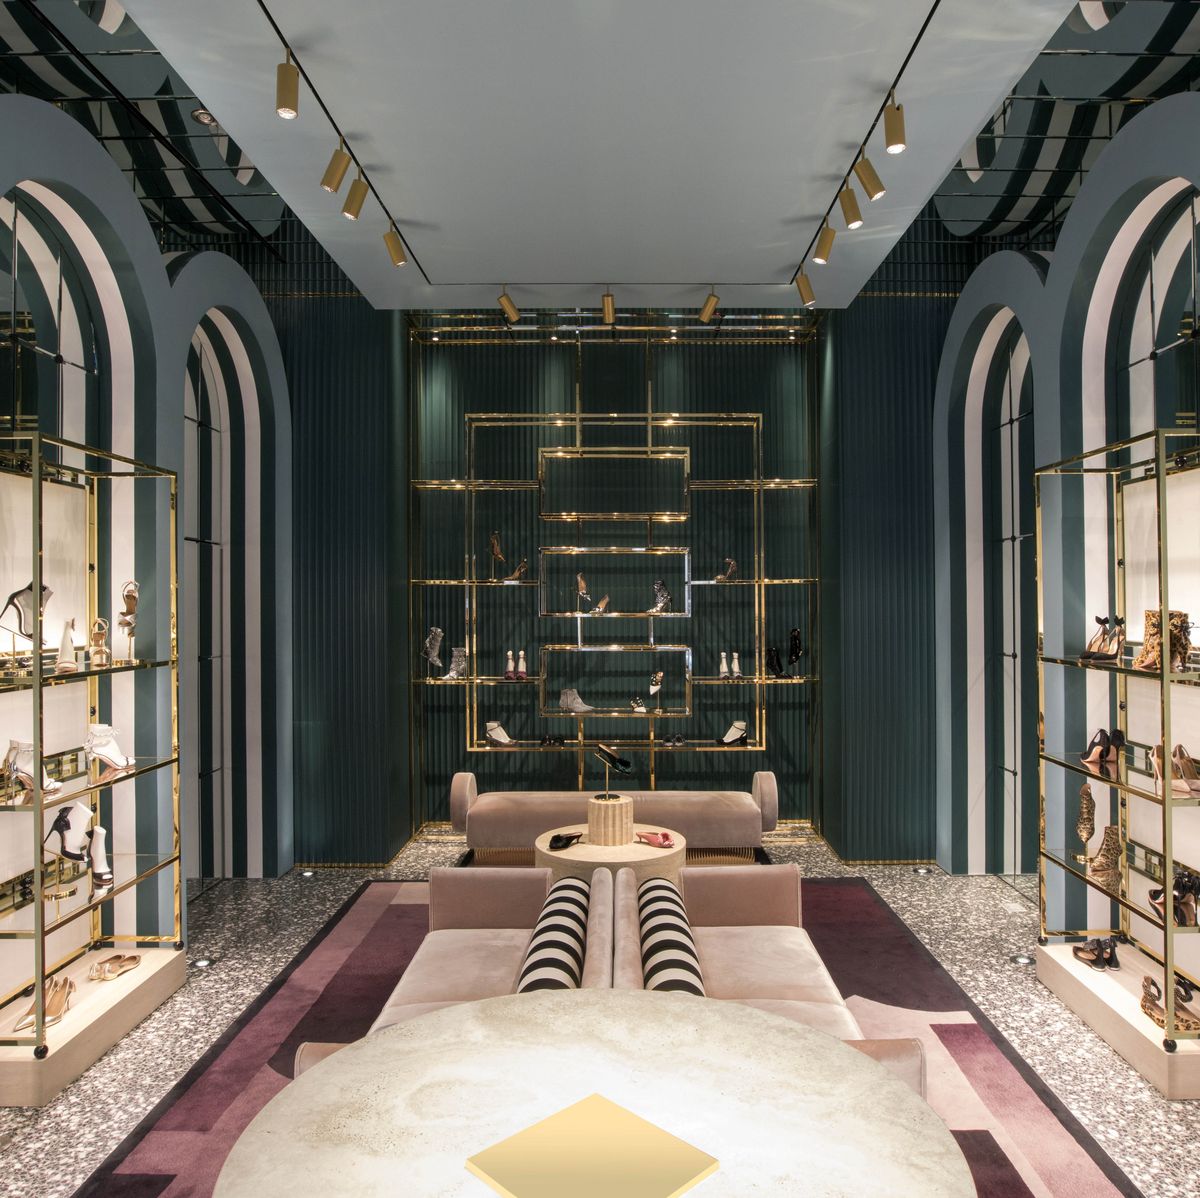 A luxury fashion boutique gets a whole new look